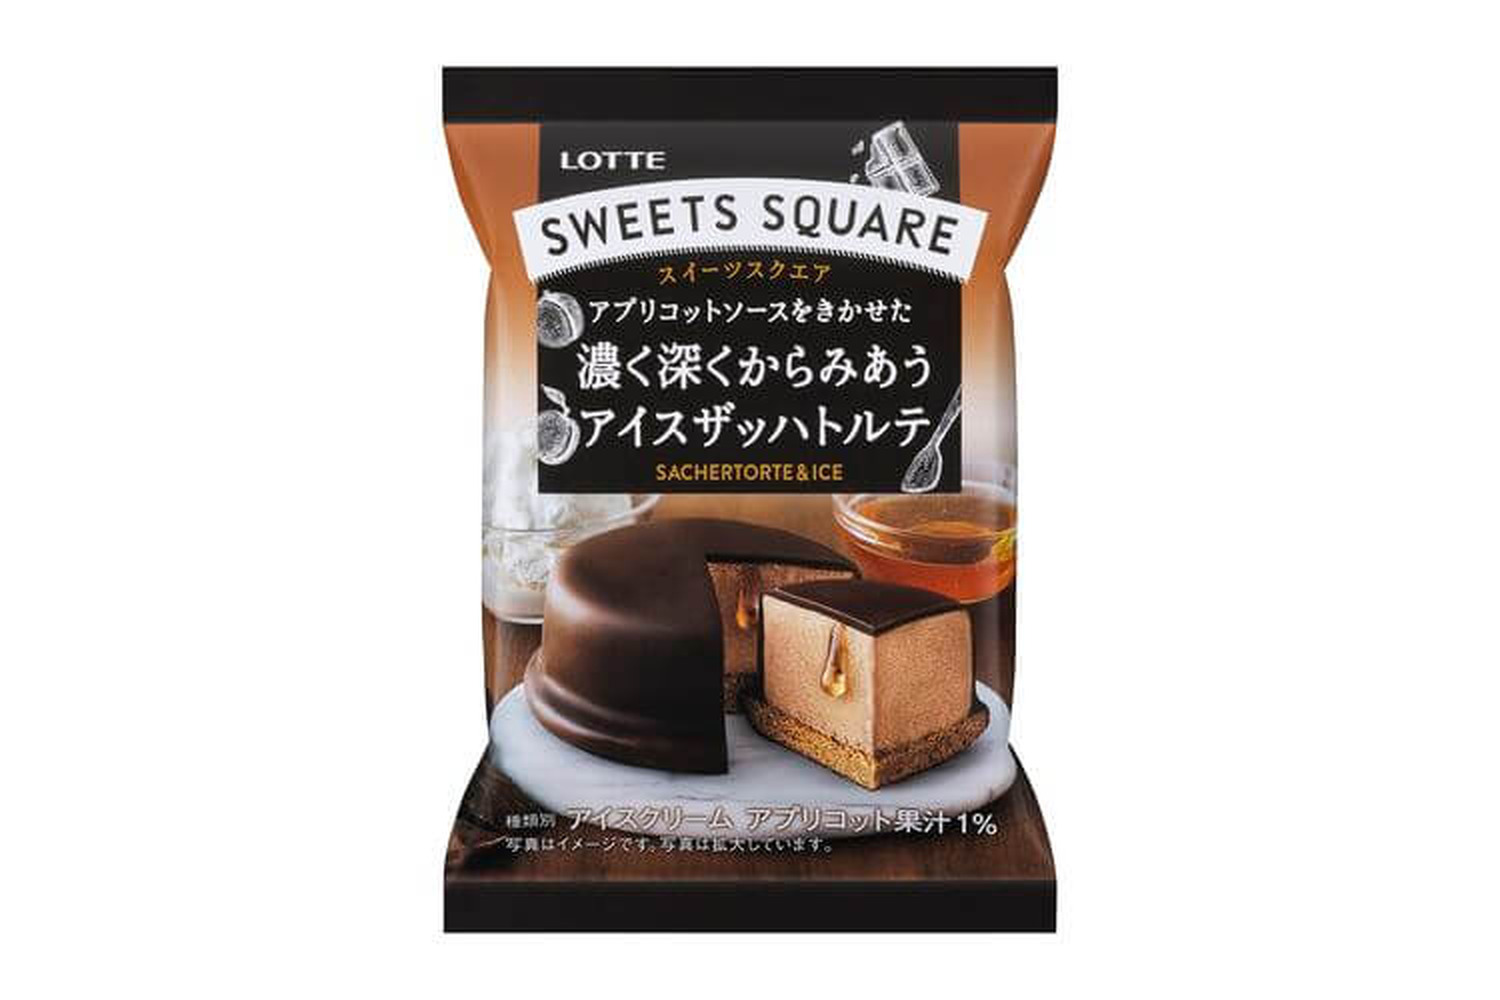 SWEETS SQUARE